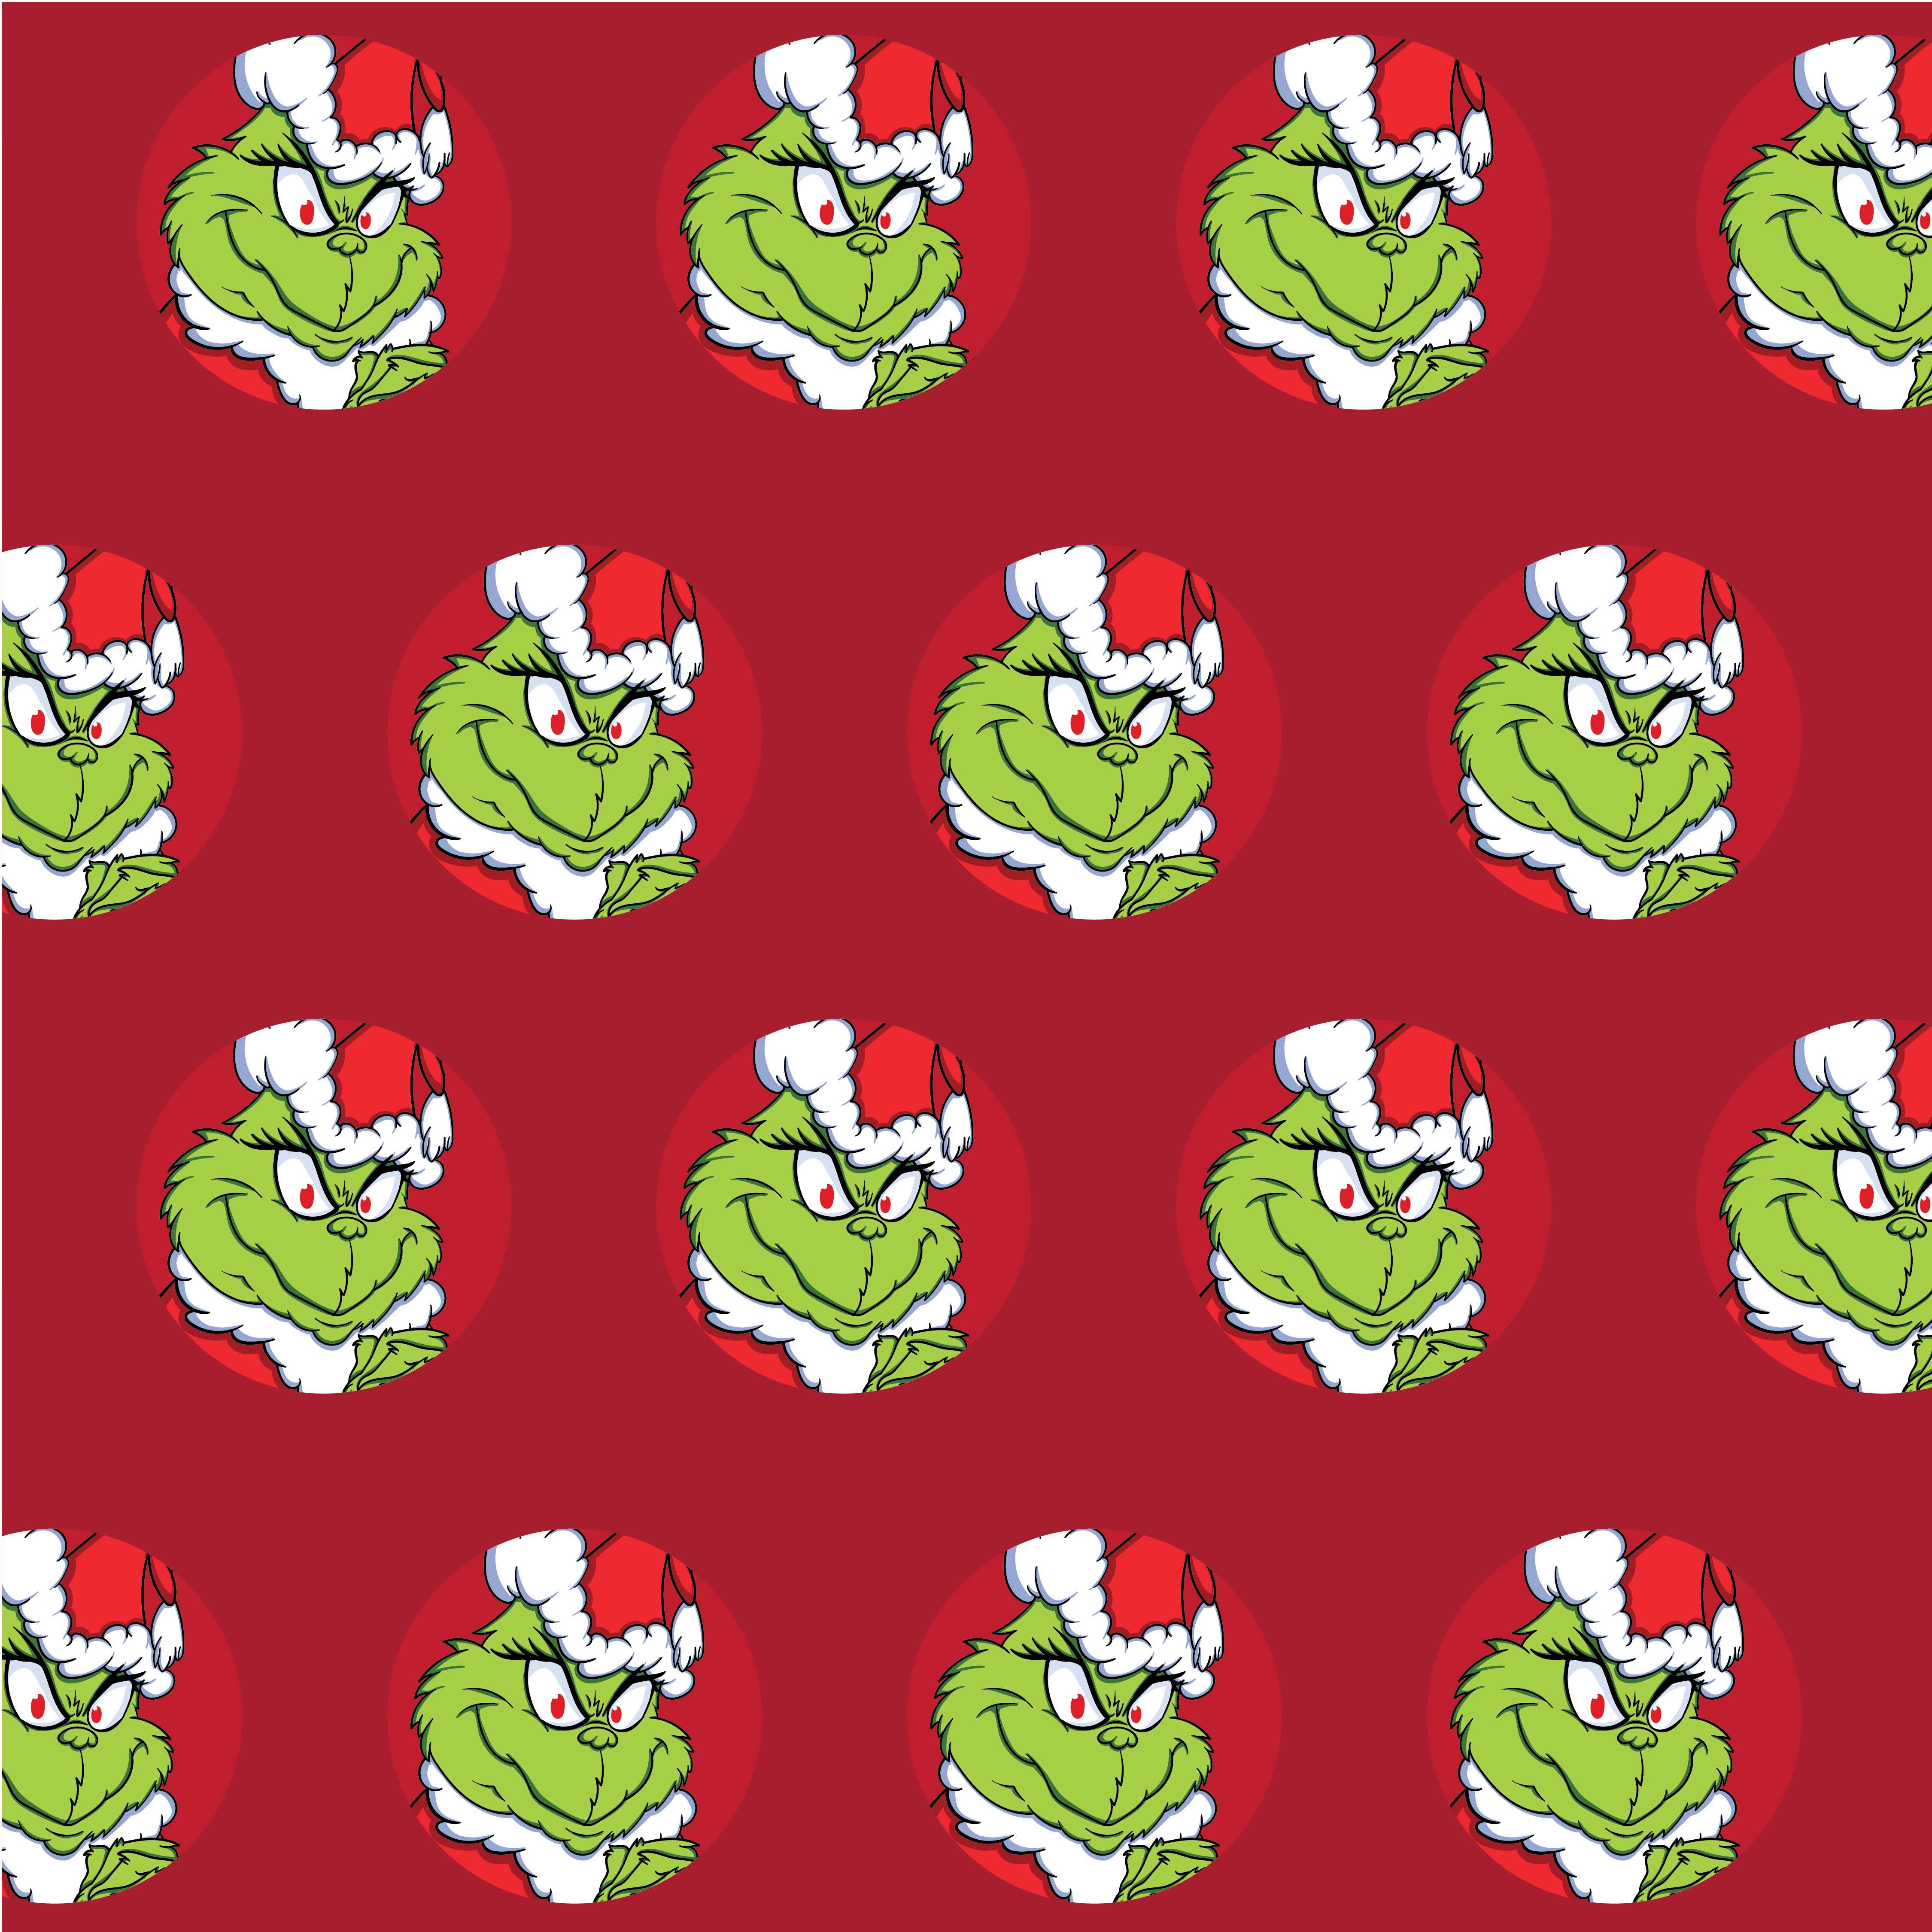 How the Grinch Stole Christmas Fabric Panel